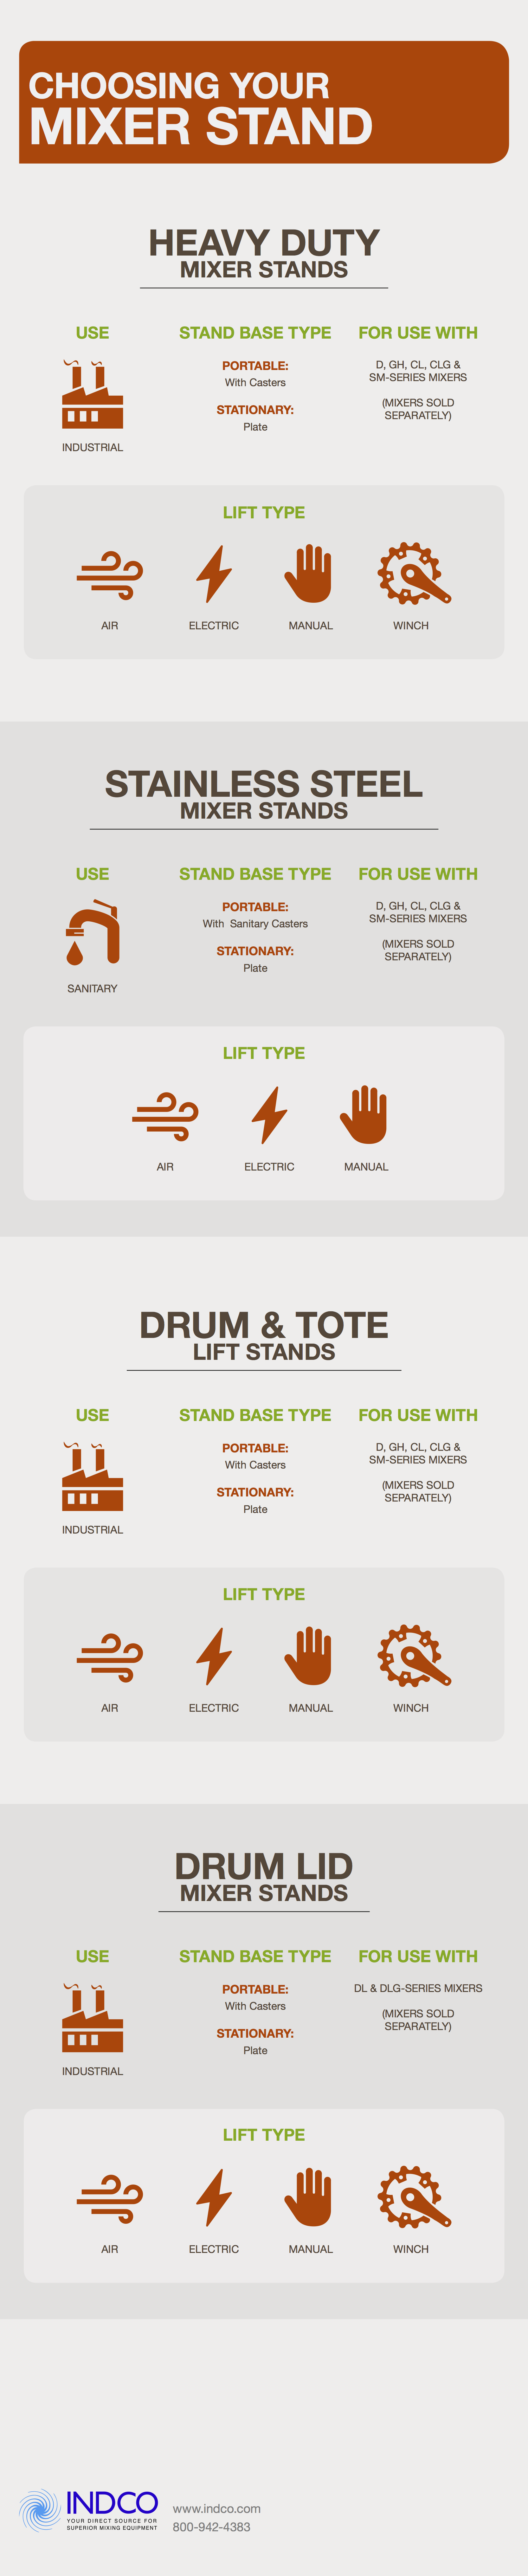 Choosing Your Mixer Stand